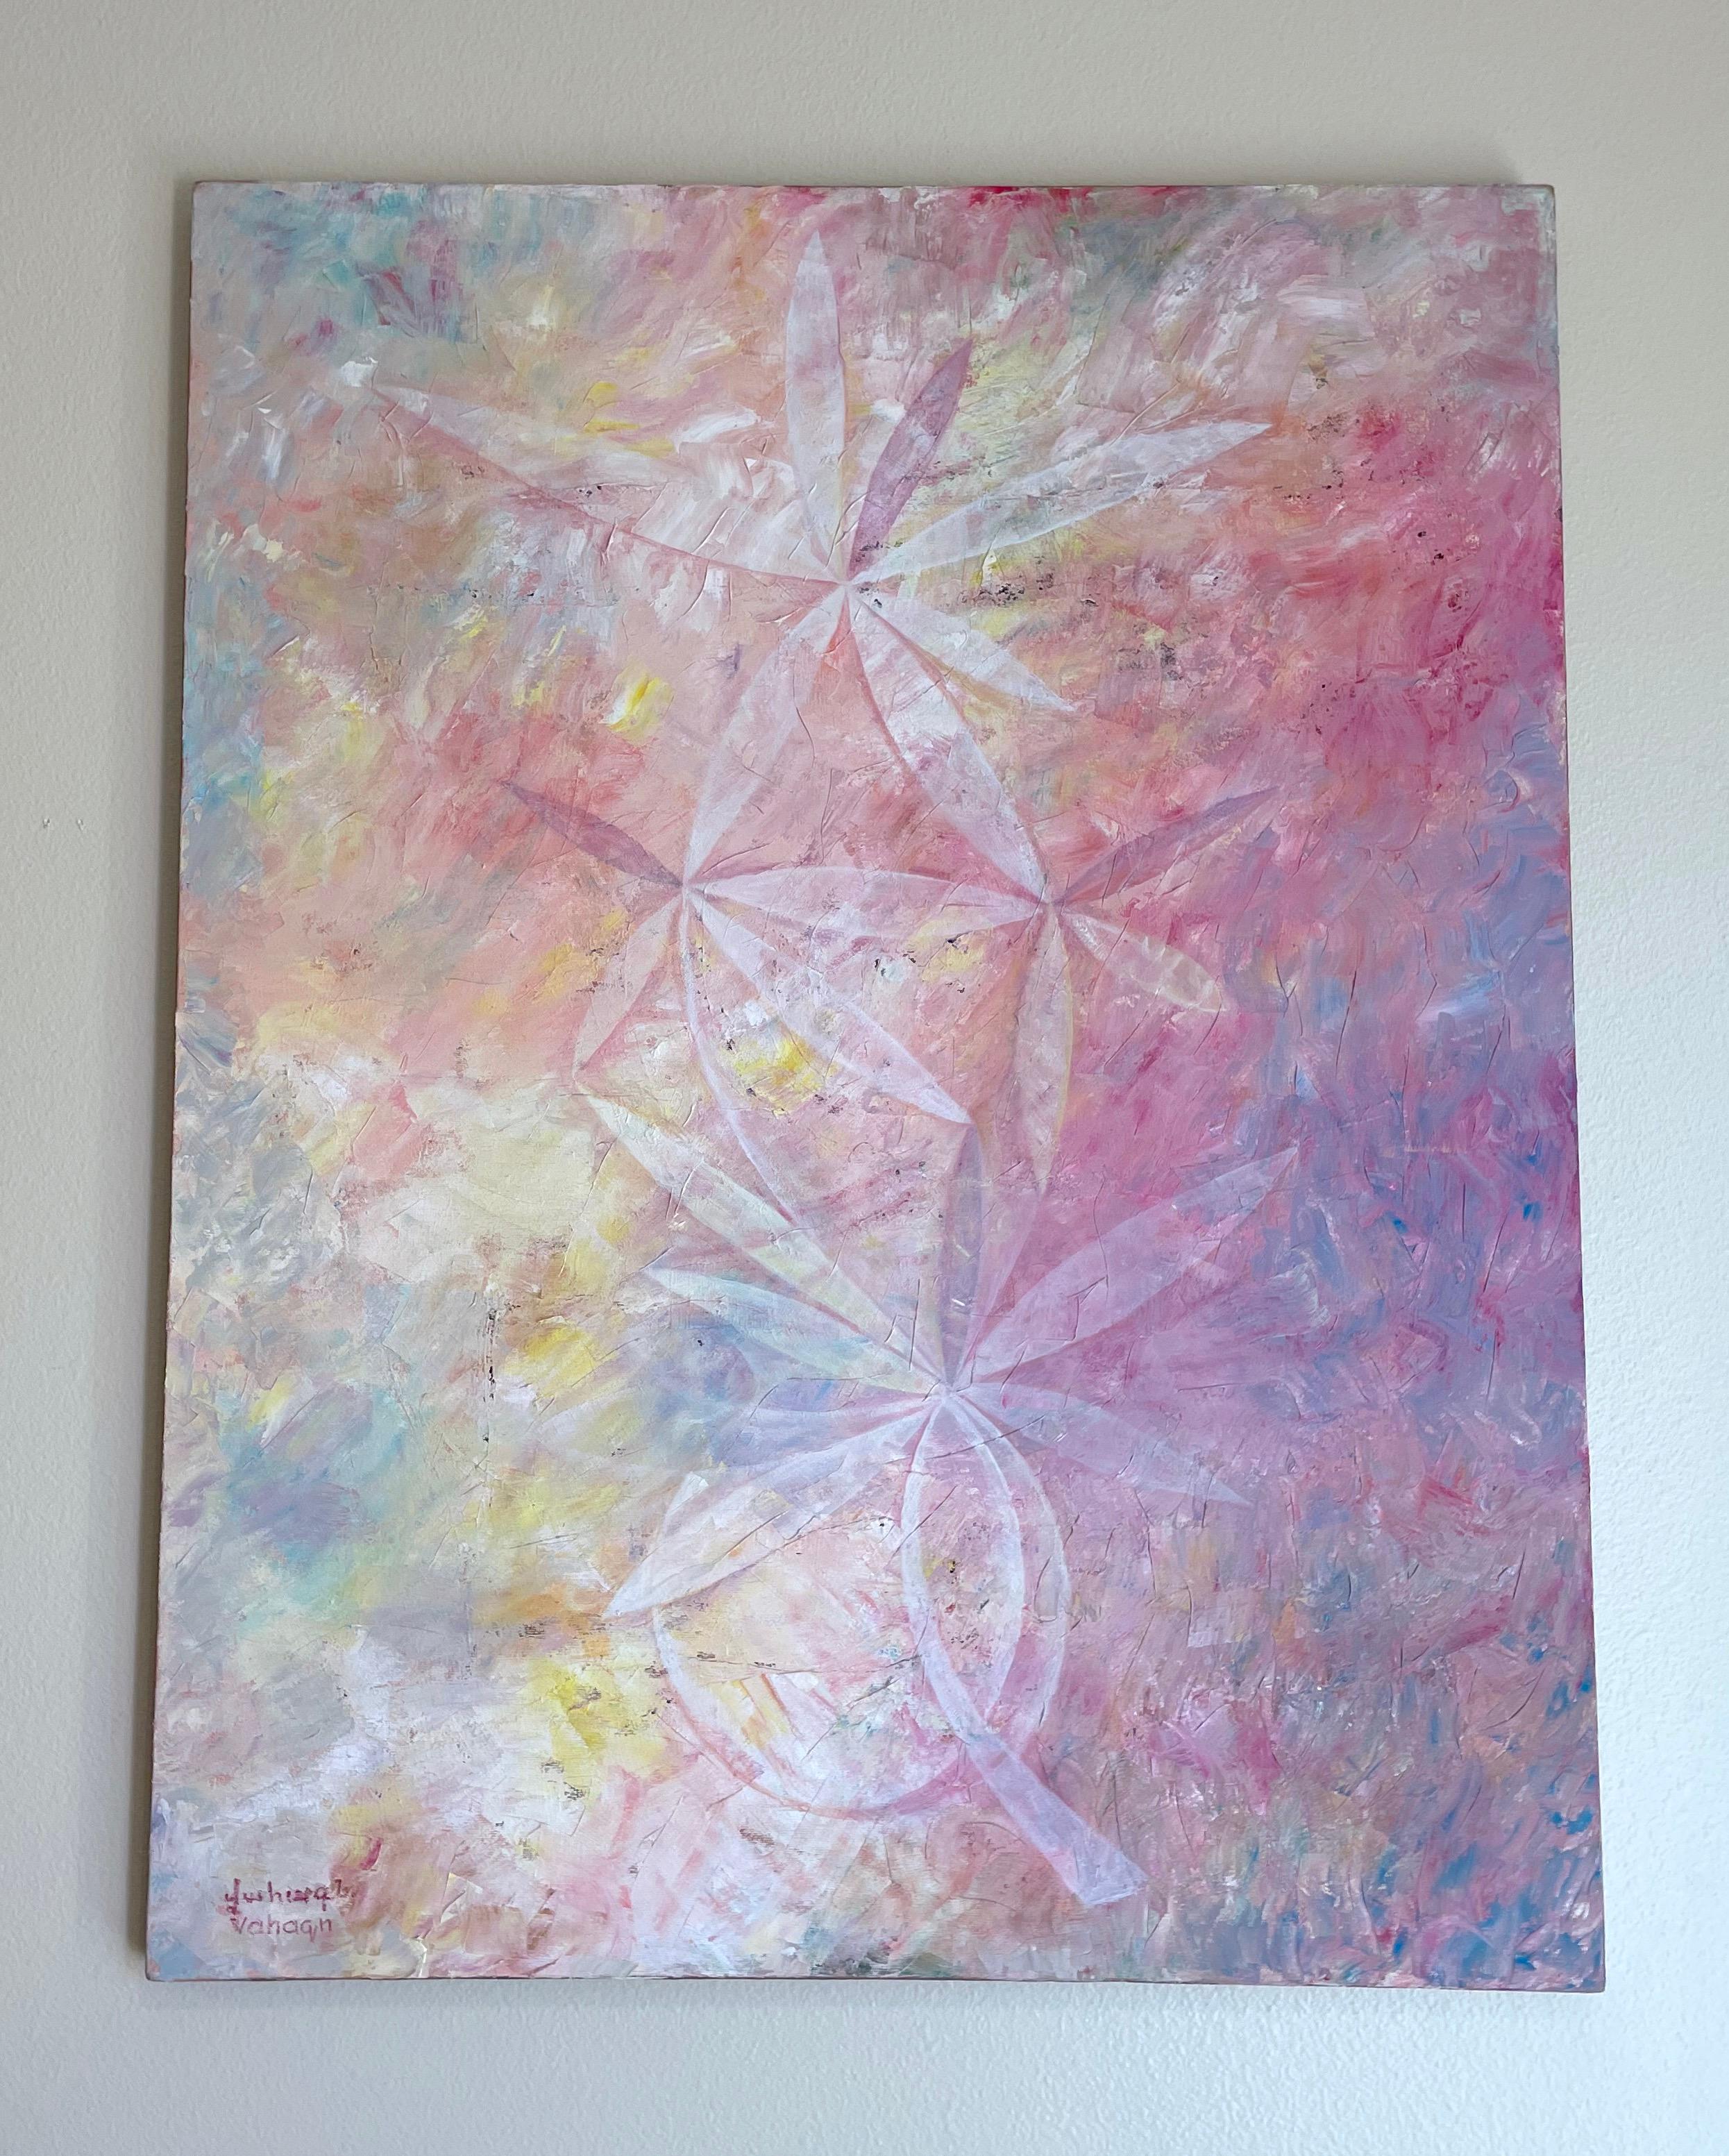 Artist: Vahagn Ghaltaghchyan
Work: Original oil painting, handmade artwork, one of a kind 
Medium: Oil on Canvas
Style: Abstract Art
Year: 2023
Title: Pink Bloom
Size: 36